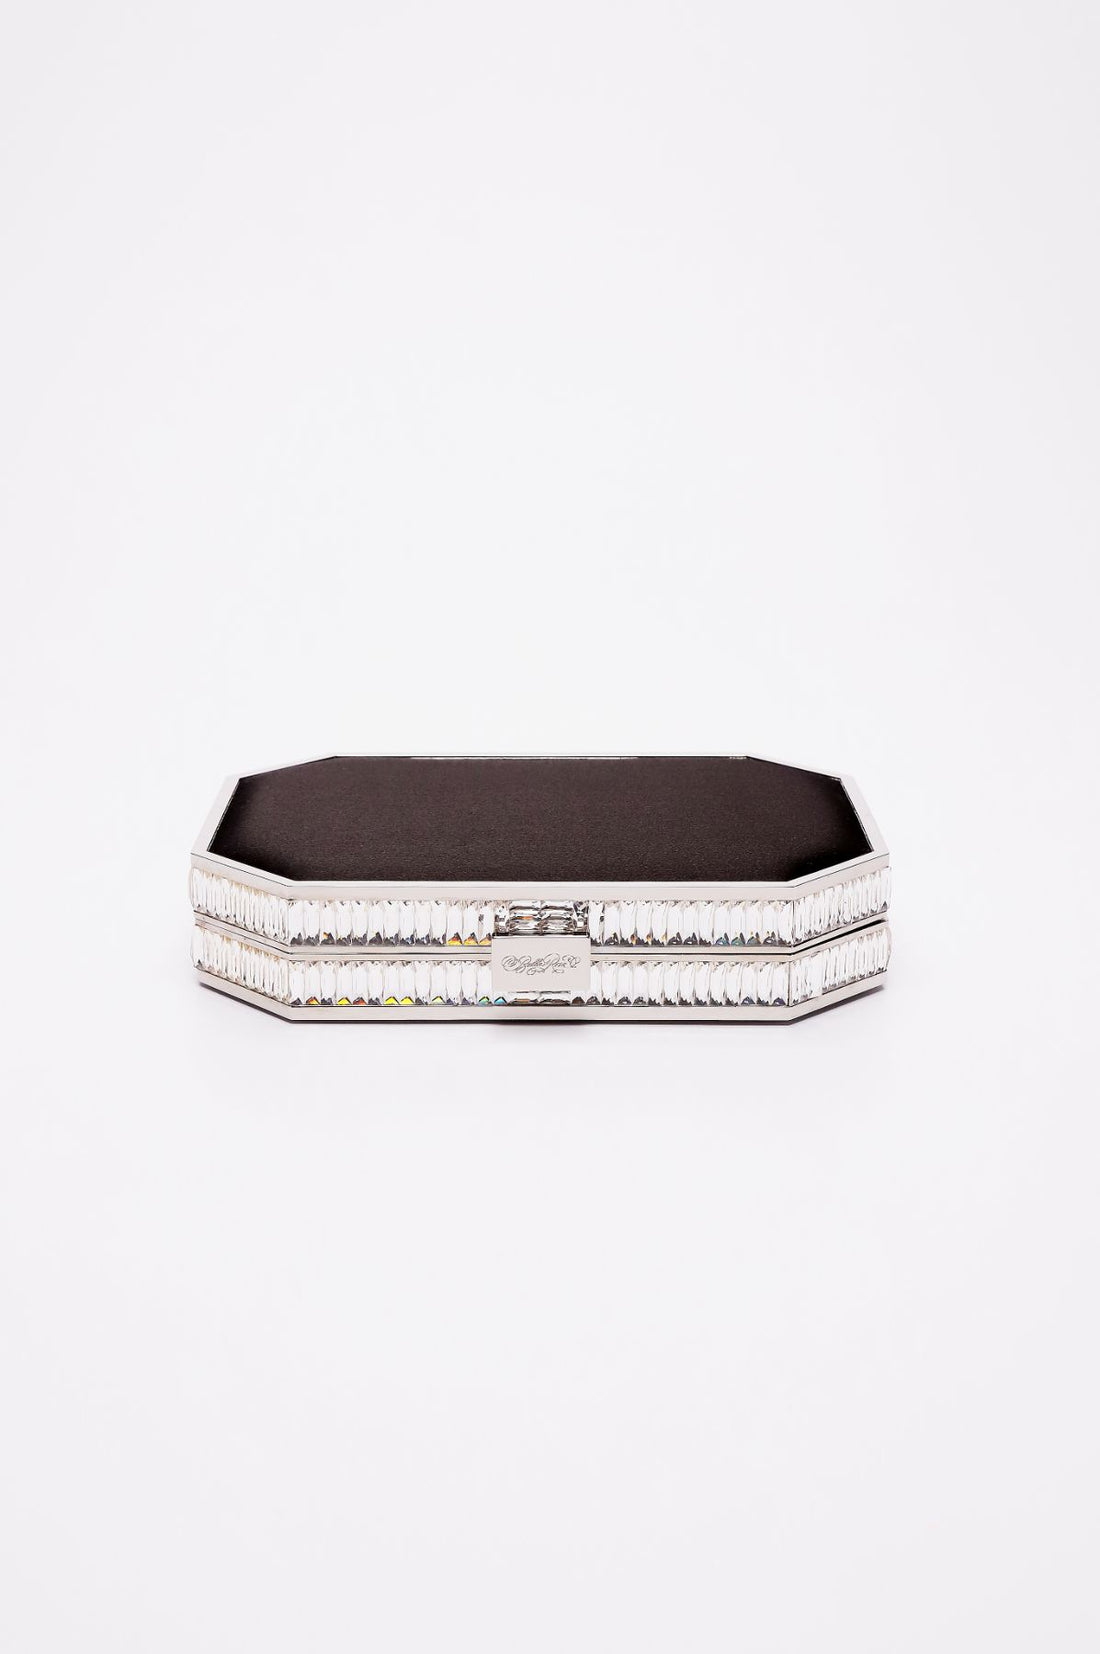 Top closed view of Como Clutch with a octagon silhouette in black satin and silver gemmed frame.